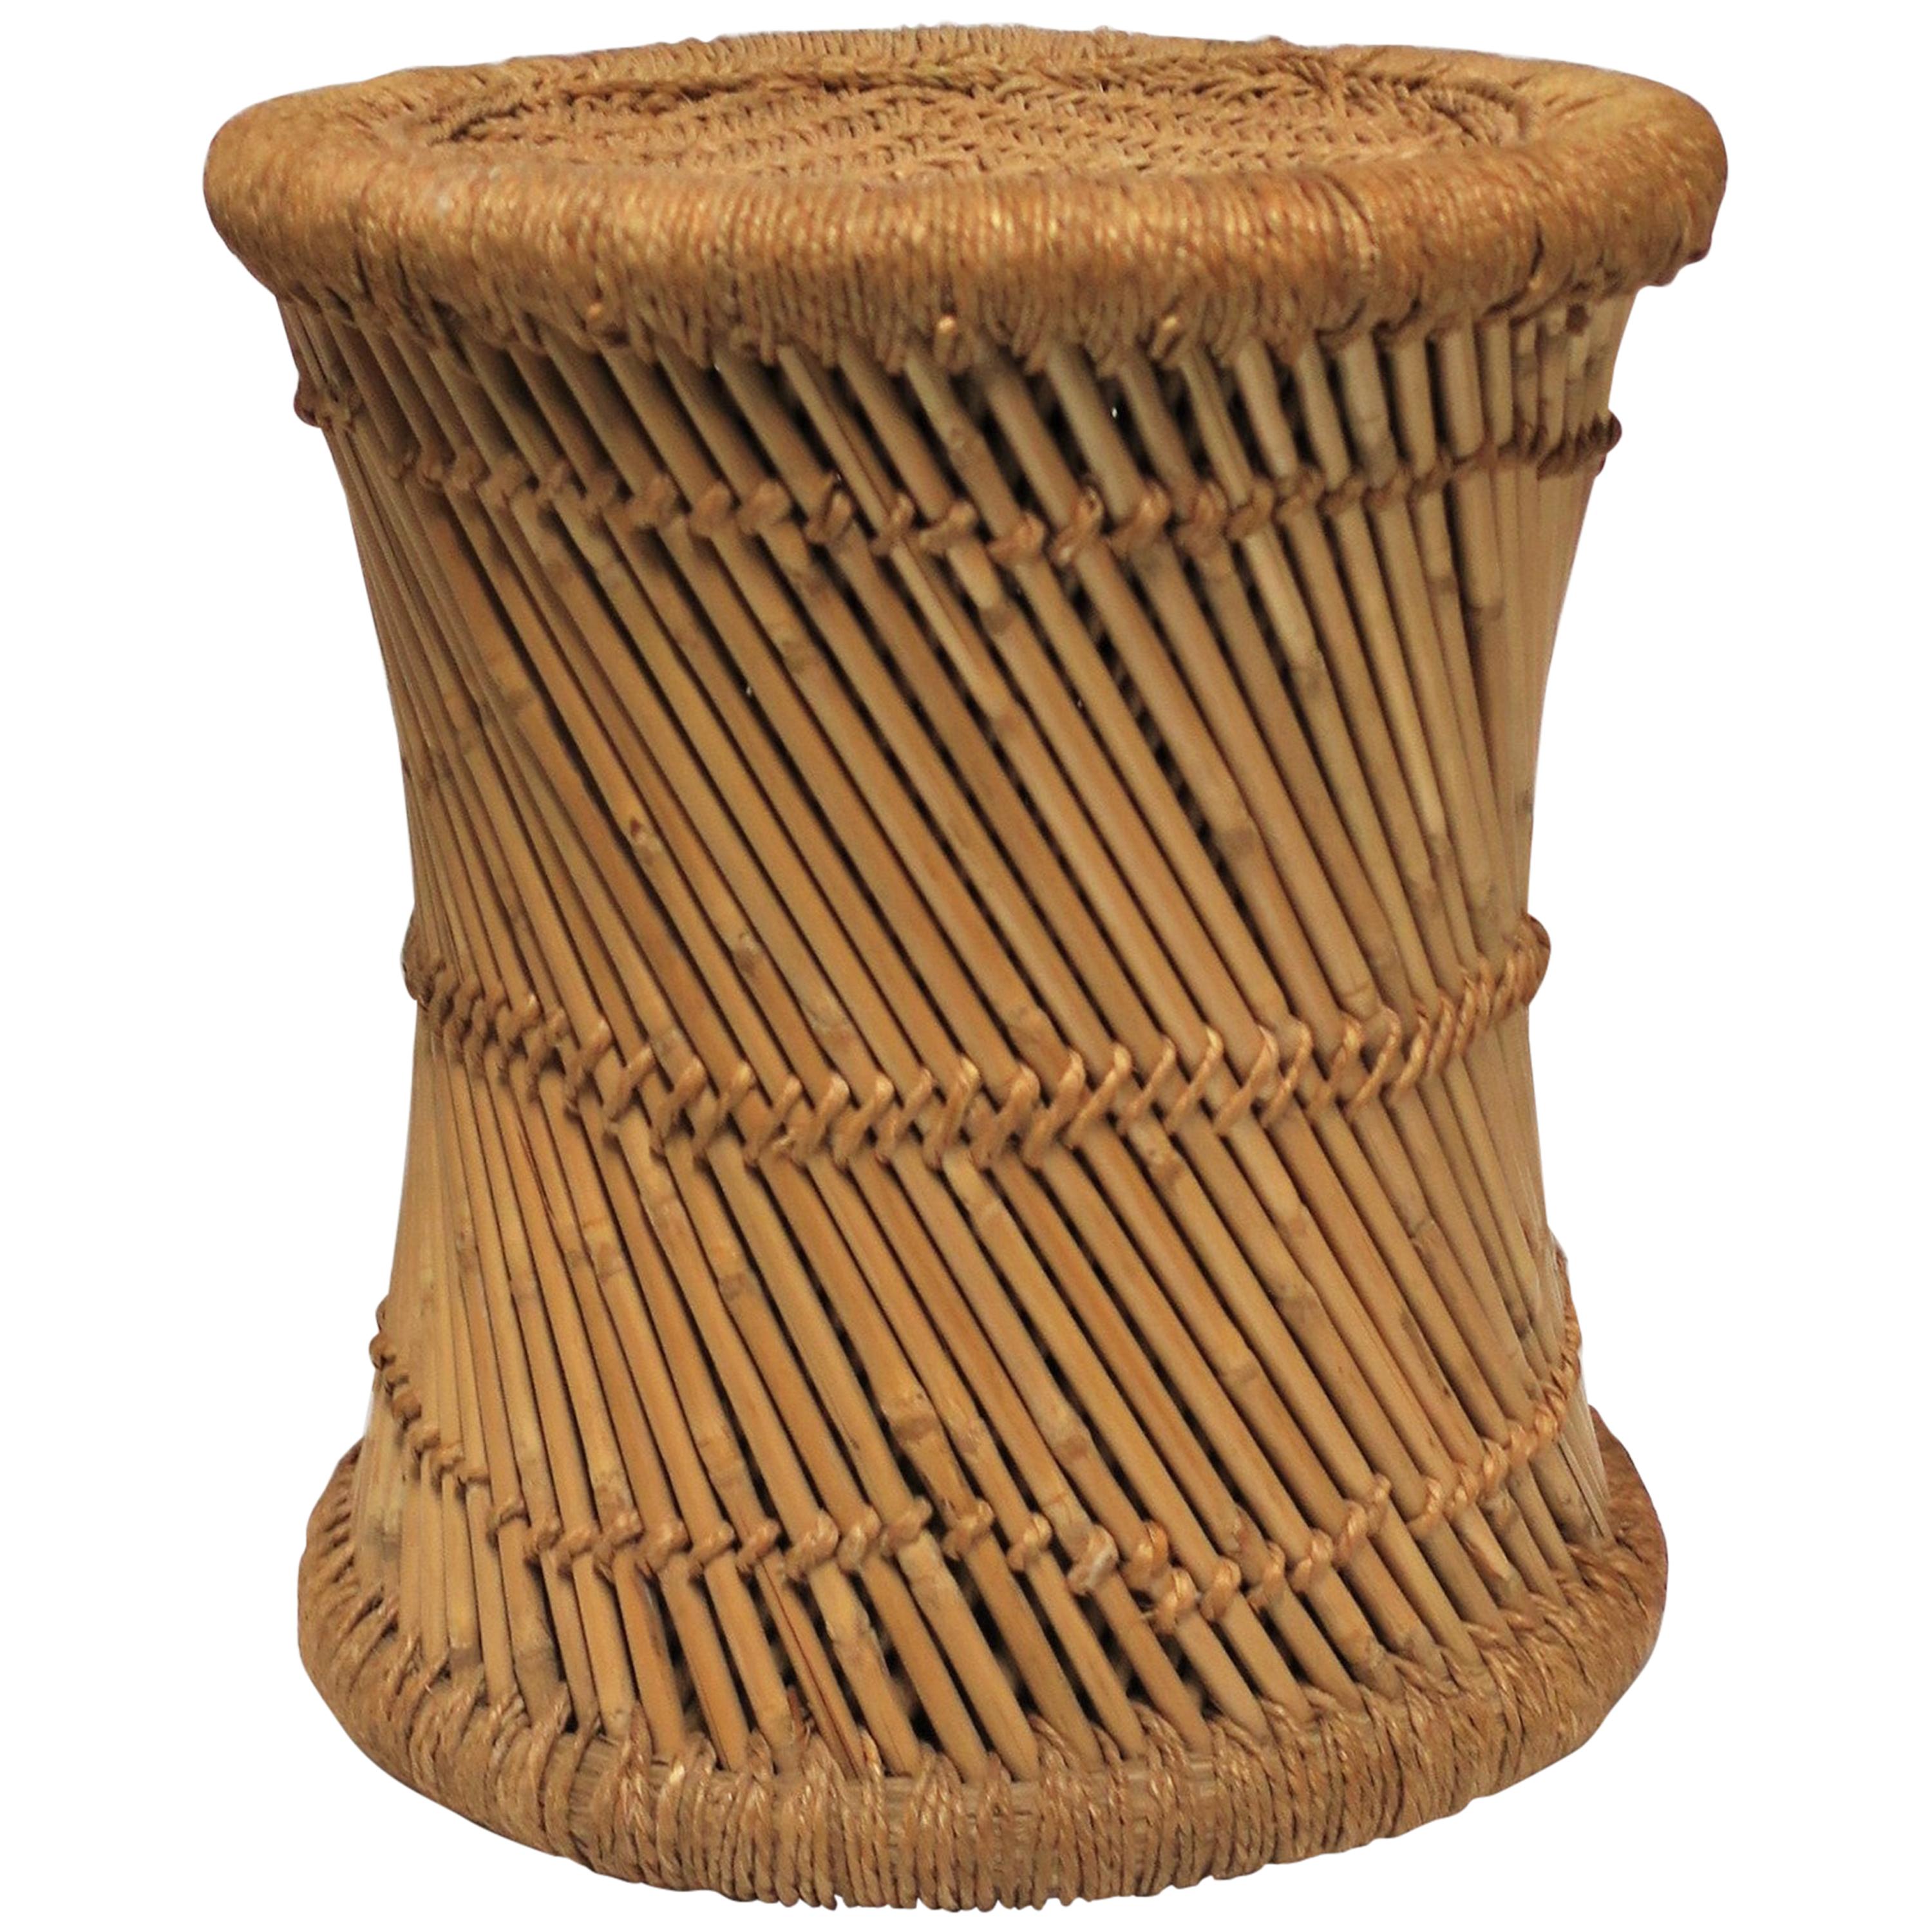 Wicker Pencil Reed Stool or Side Table